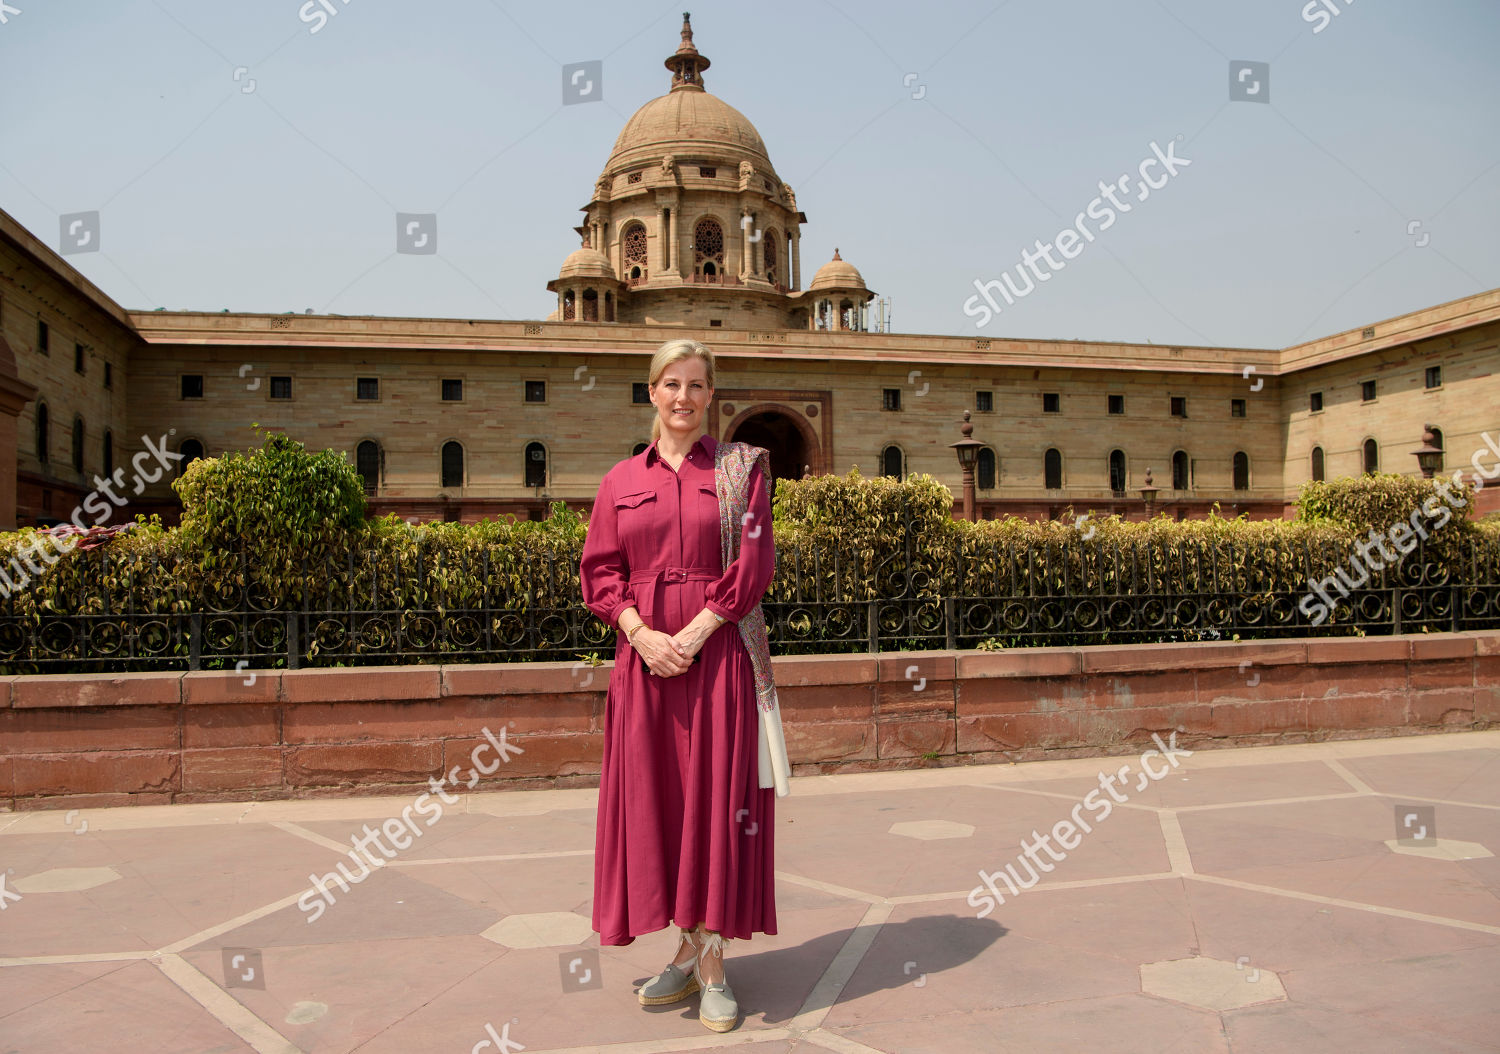 sophie-countess-of-wessex-visit-to-india-shutterstock-editorial-10227195du.jpg